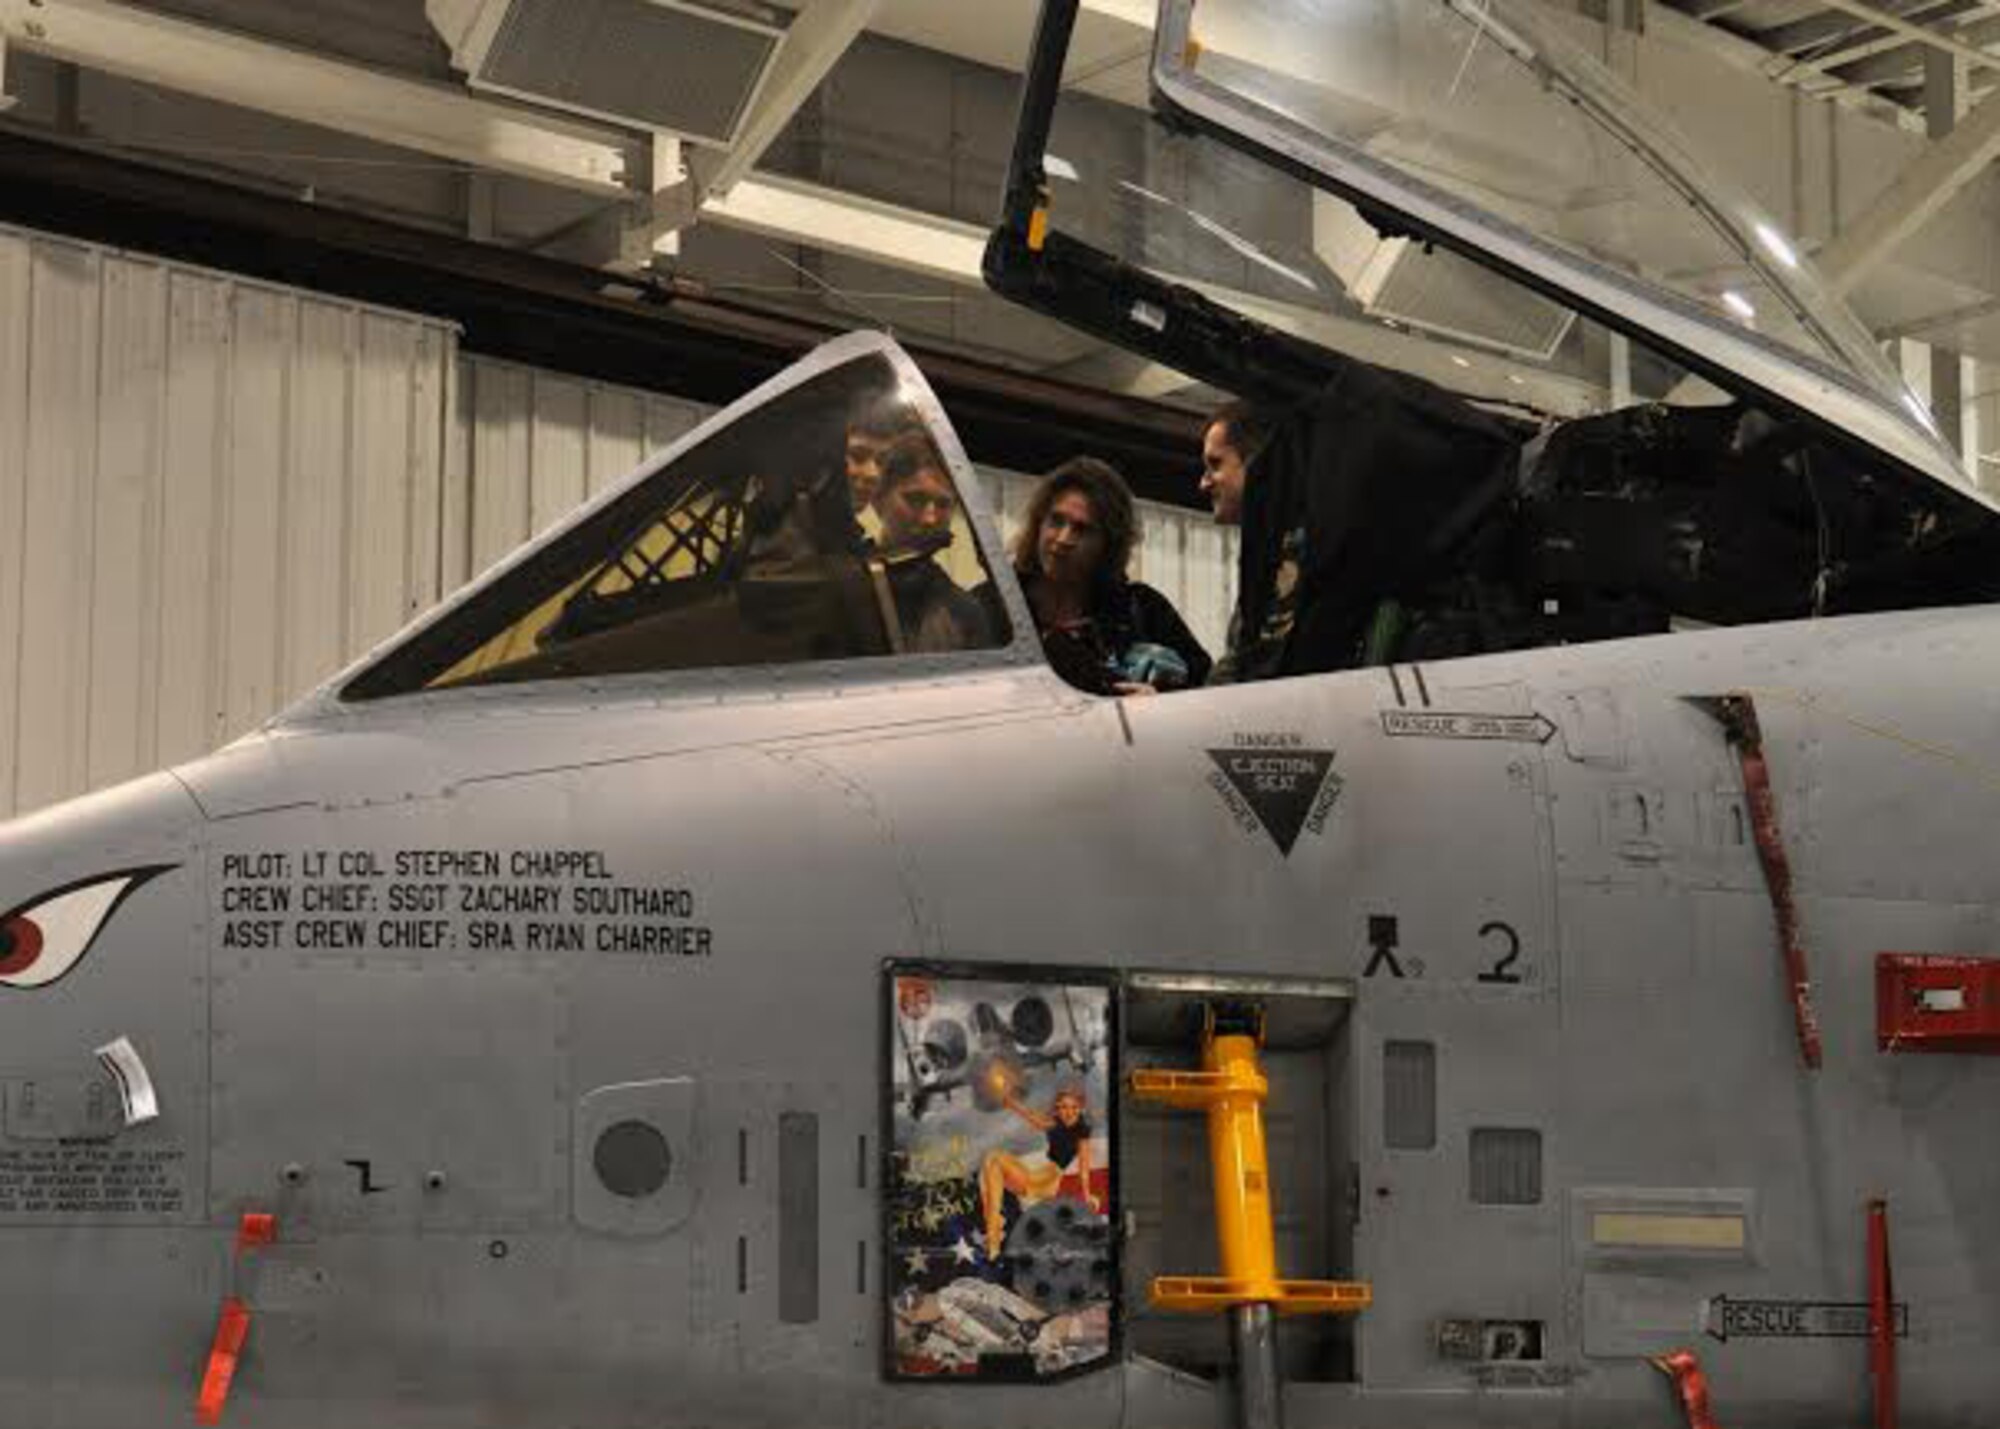 The cockpit of the A-10 Thunderbolt II is opened for students from the Wright Flight Program in Columbia, Mo., to view at Whiteman Air Force Base, Mo., March 24, 2015. The 442nd Fighter Wing is home to 27 A-10s. (U.S. Air Force photo by Airman 1st Class Missy Sterling/Released)     